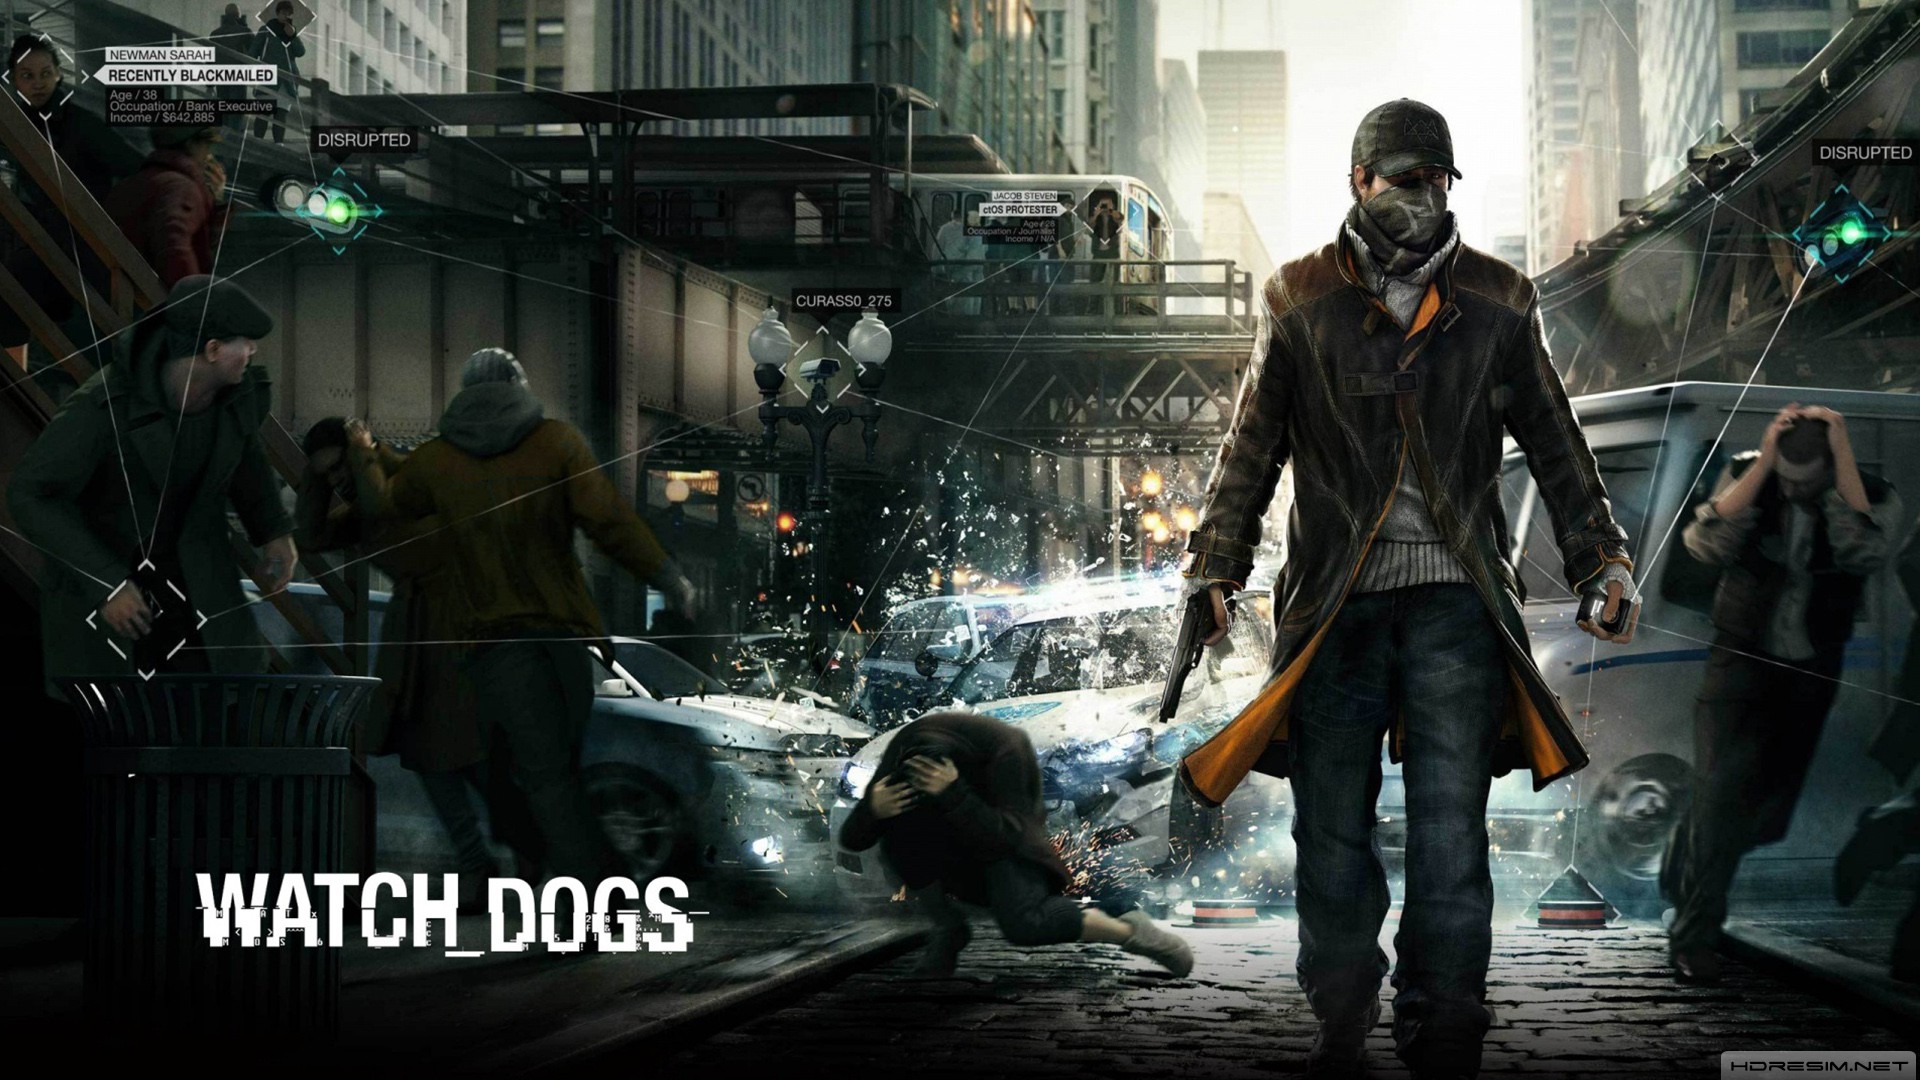 watch dogs,tps